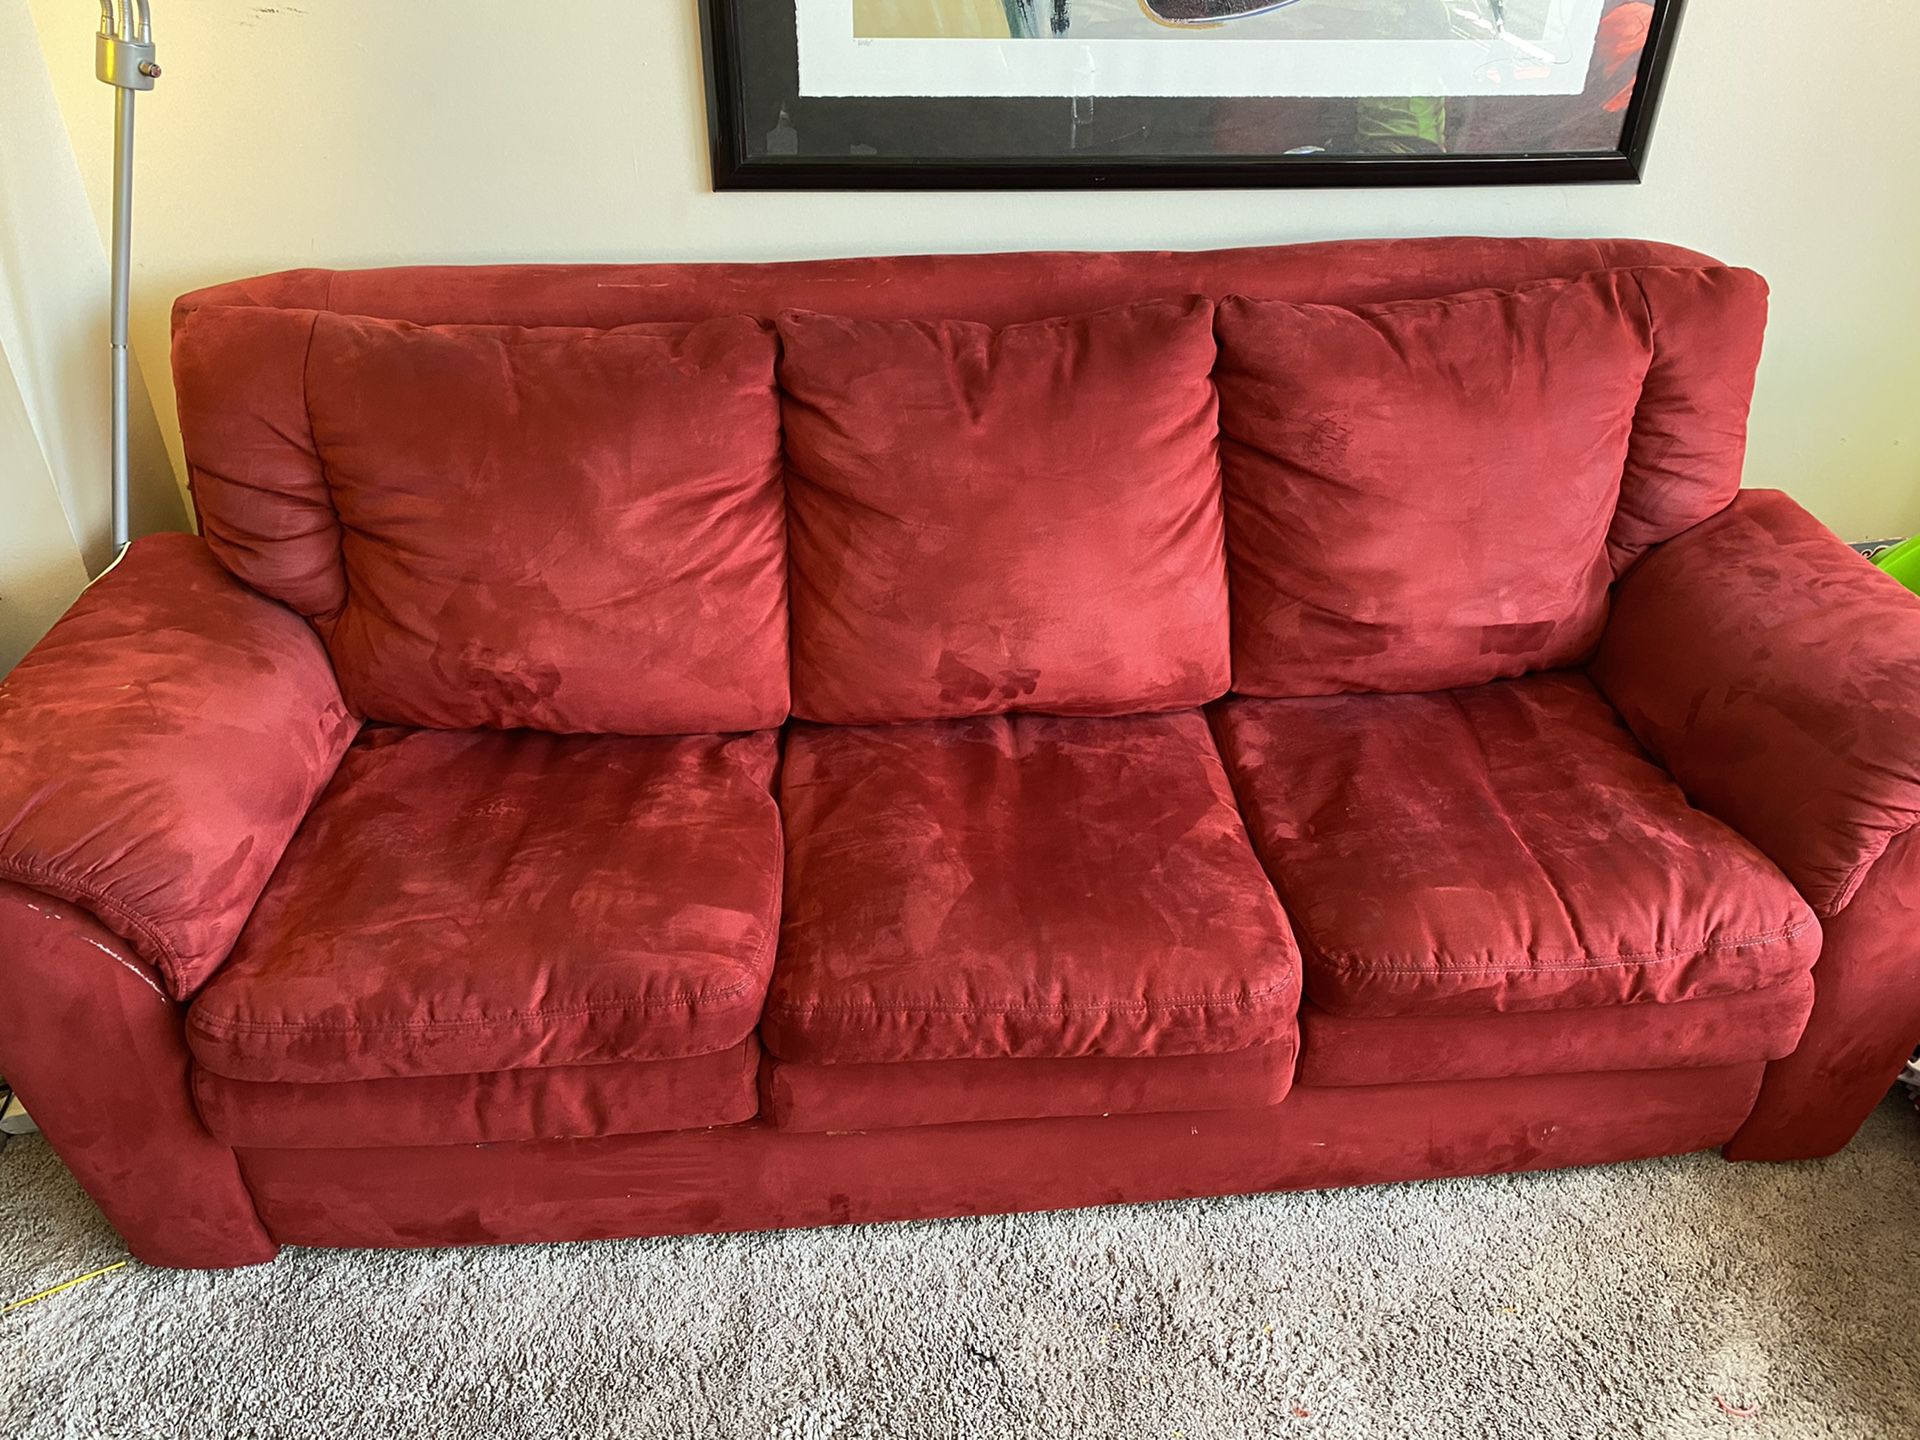 3 Piece Red Suede Couch